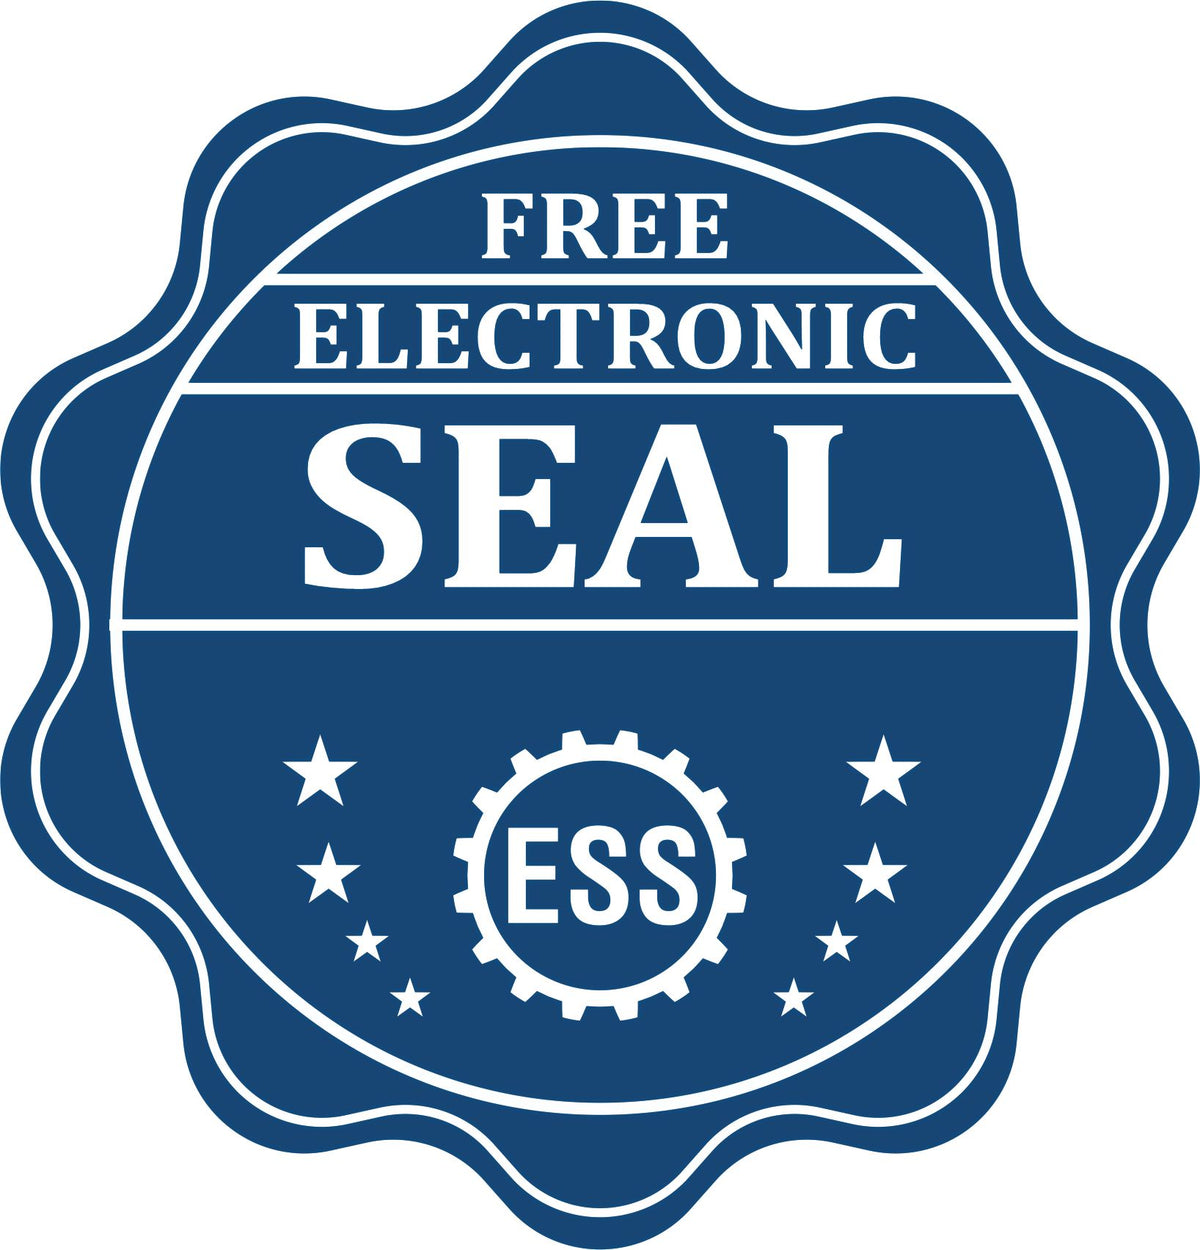 A badge showing a free electronic seal for the Wooden Handle New Mexico State Seal Notary Public Stamp with stars and the ESS gear on the emblem.